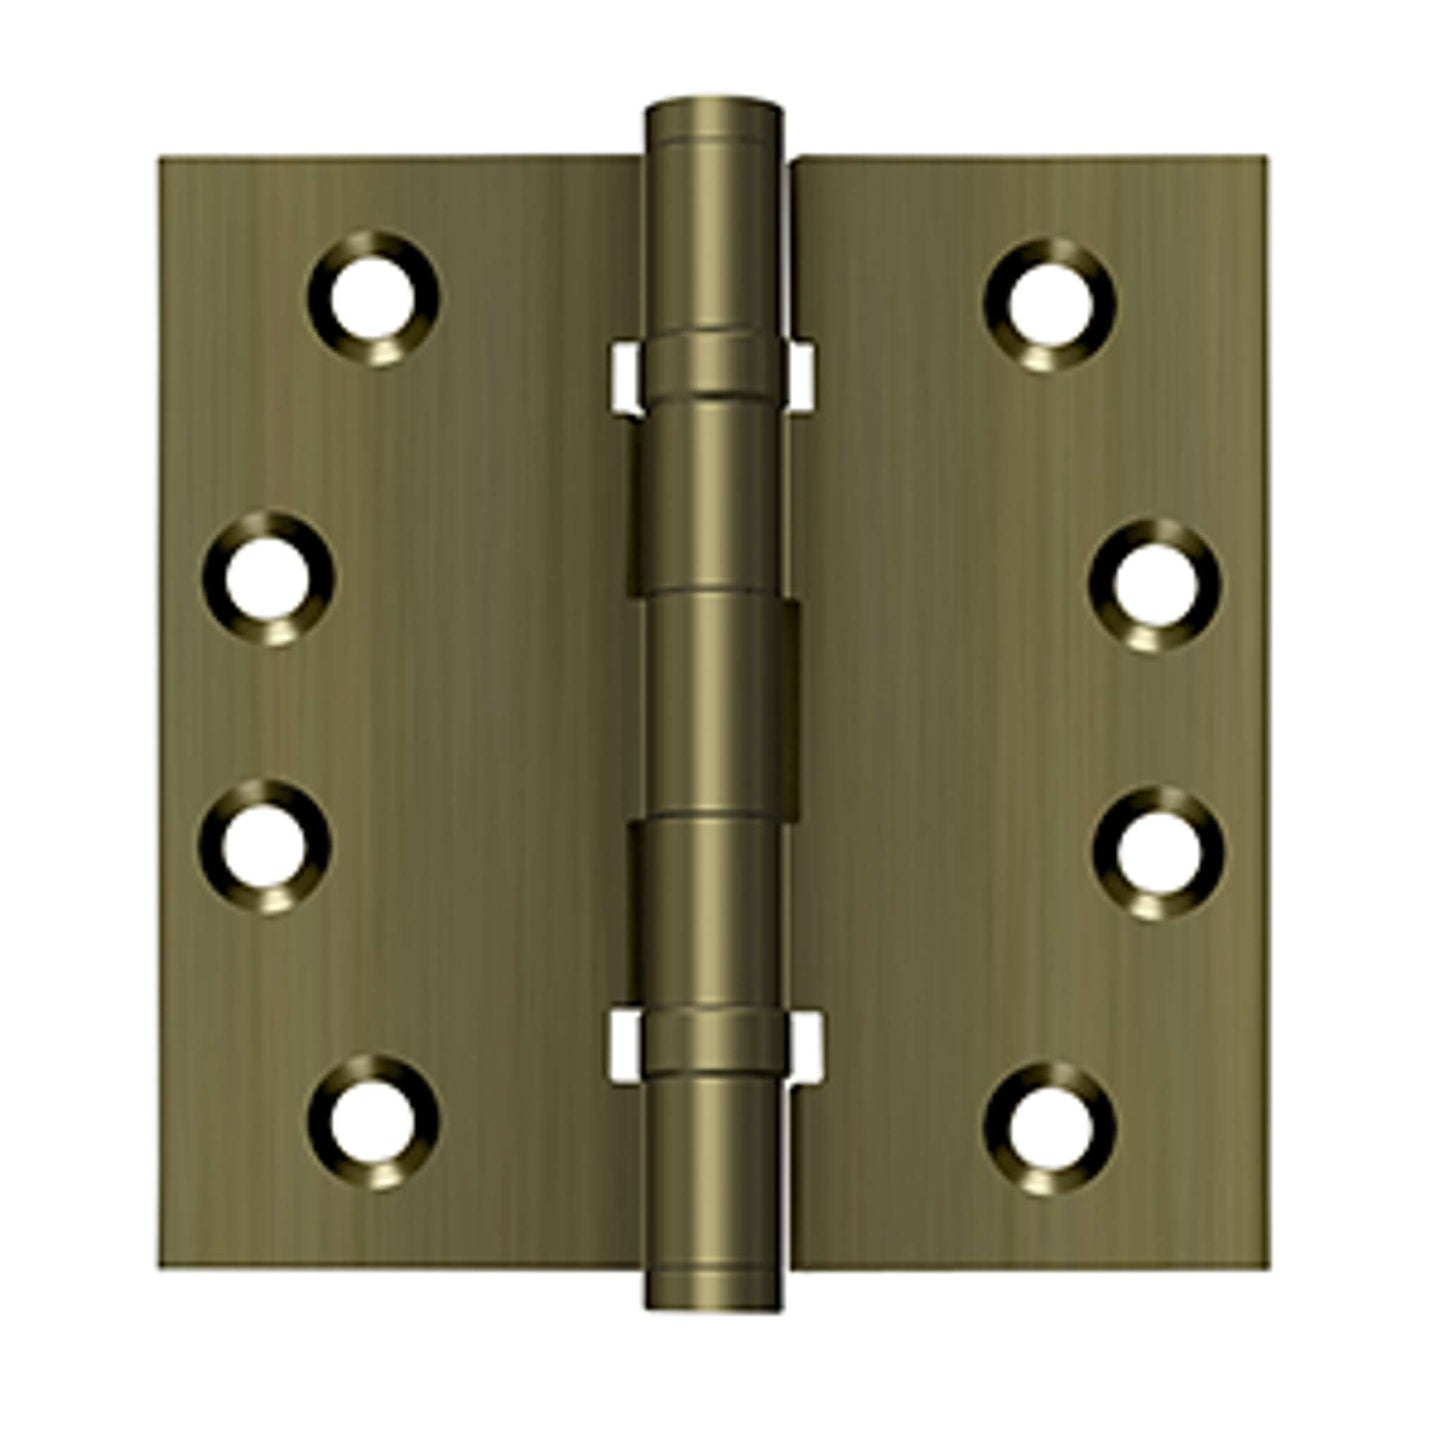 Deltana - 4" x 4" Square Hinges, Ball Bearings, Solid Brass Hinges